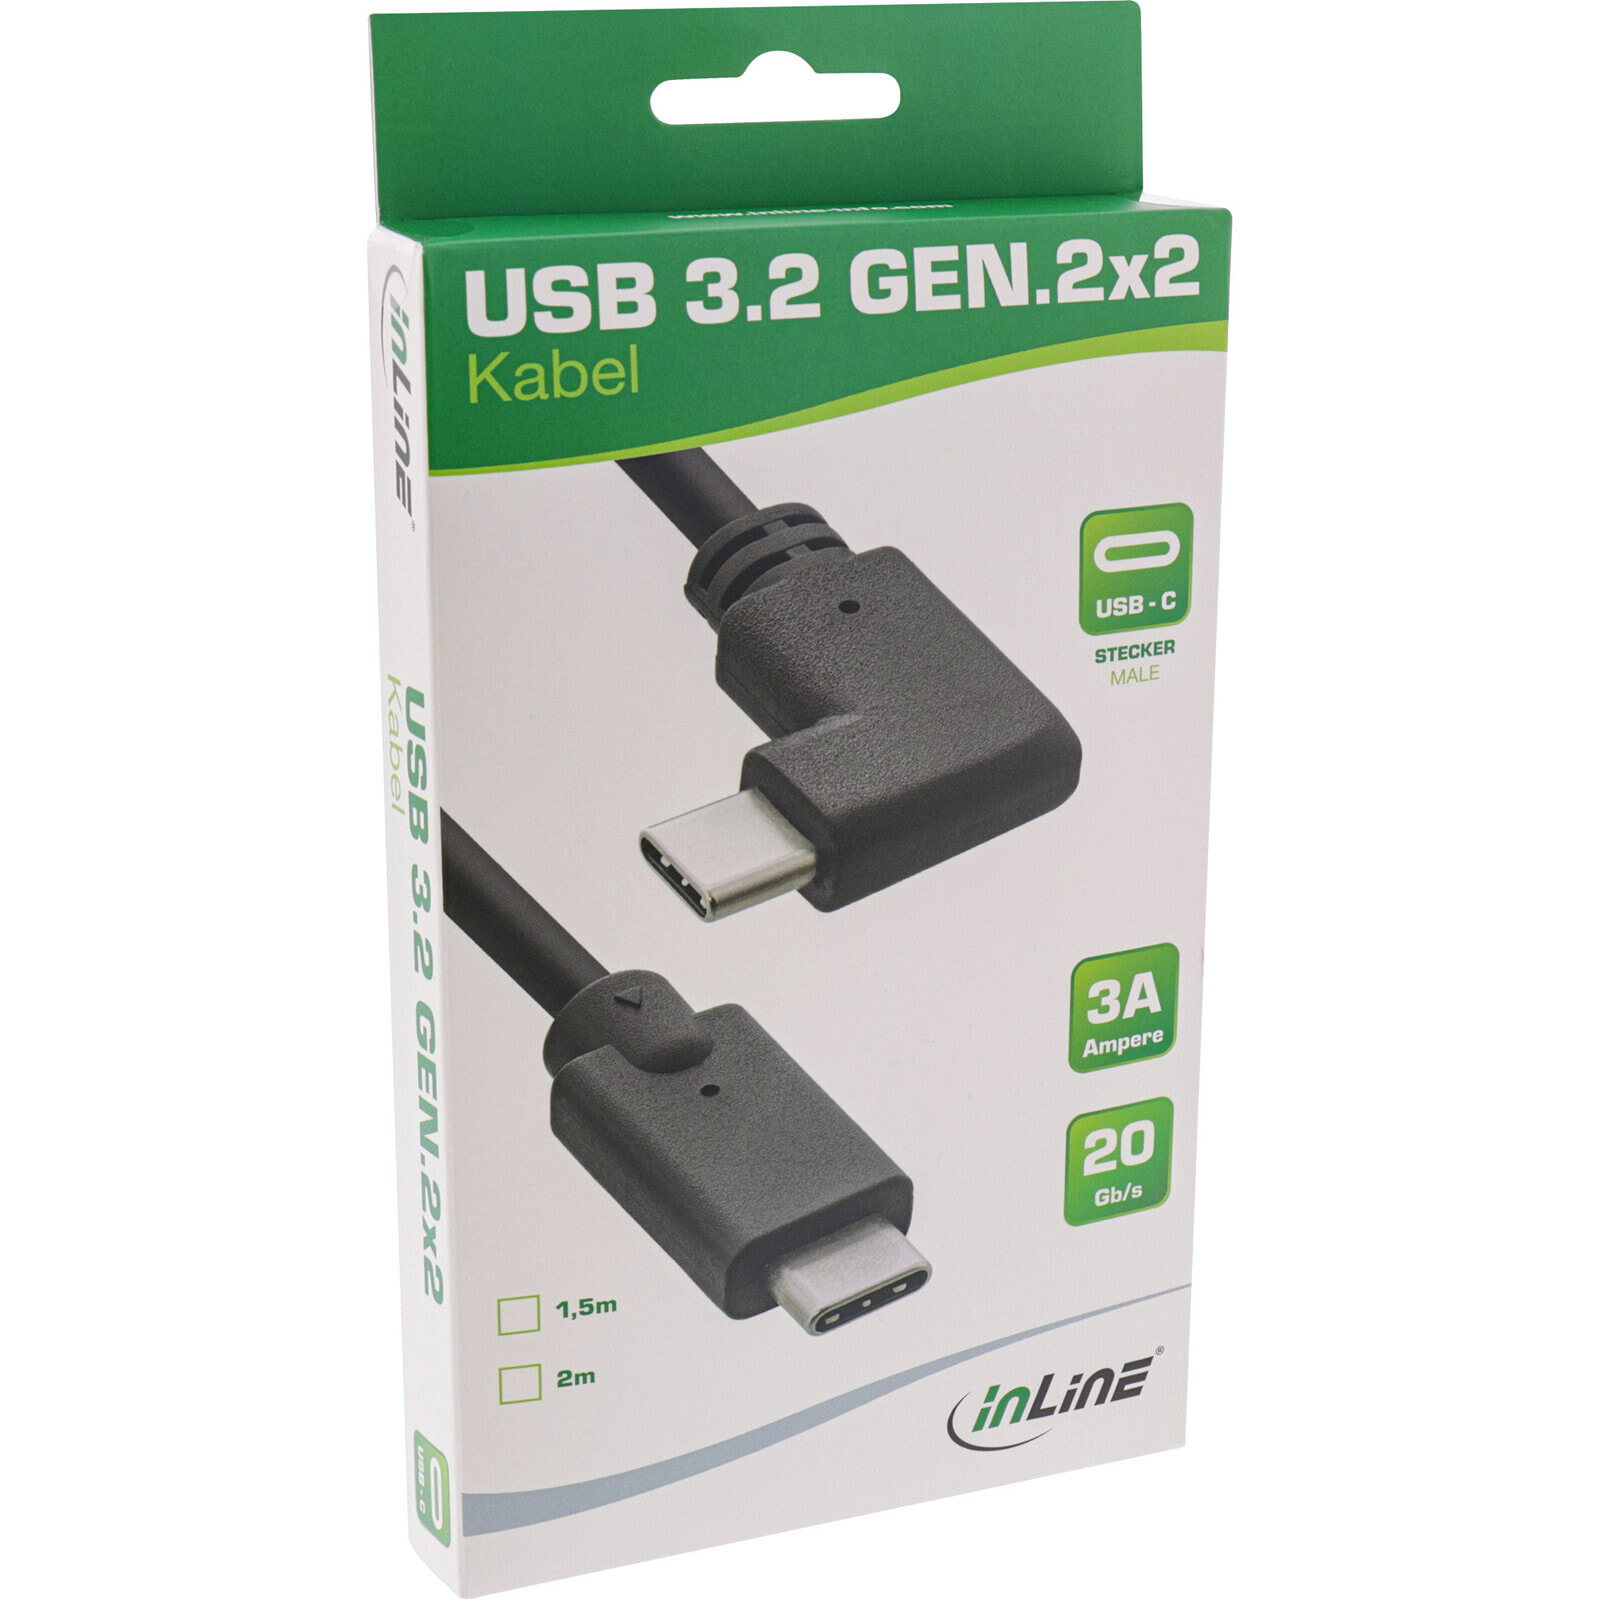 USB 3.2 Gen.2 cable - USB Type-C male/male angled - black - 1.5m - 1.5 m - USB C - USB C - USB 3.2 Gen 2 (3.1 Gen 2) - Black